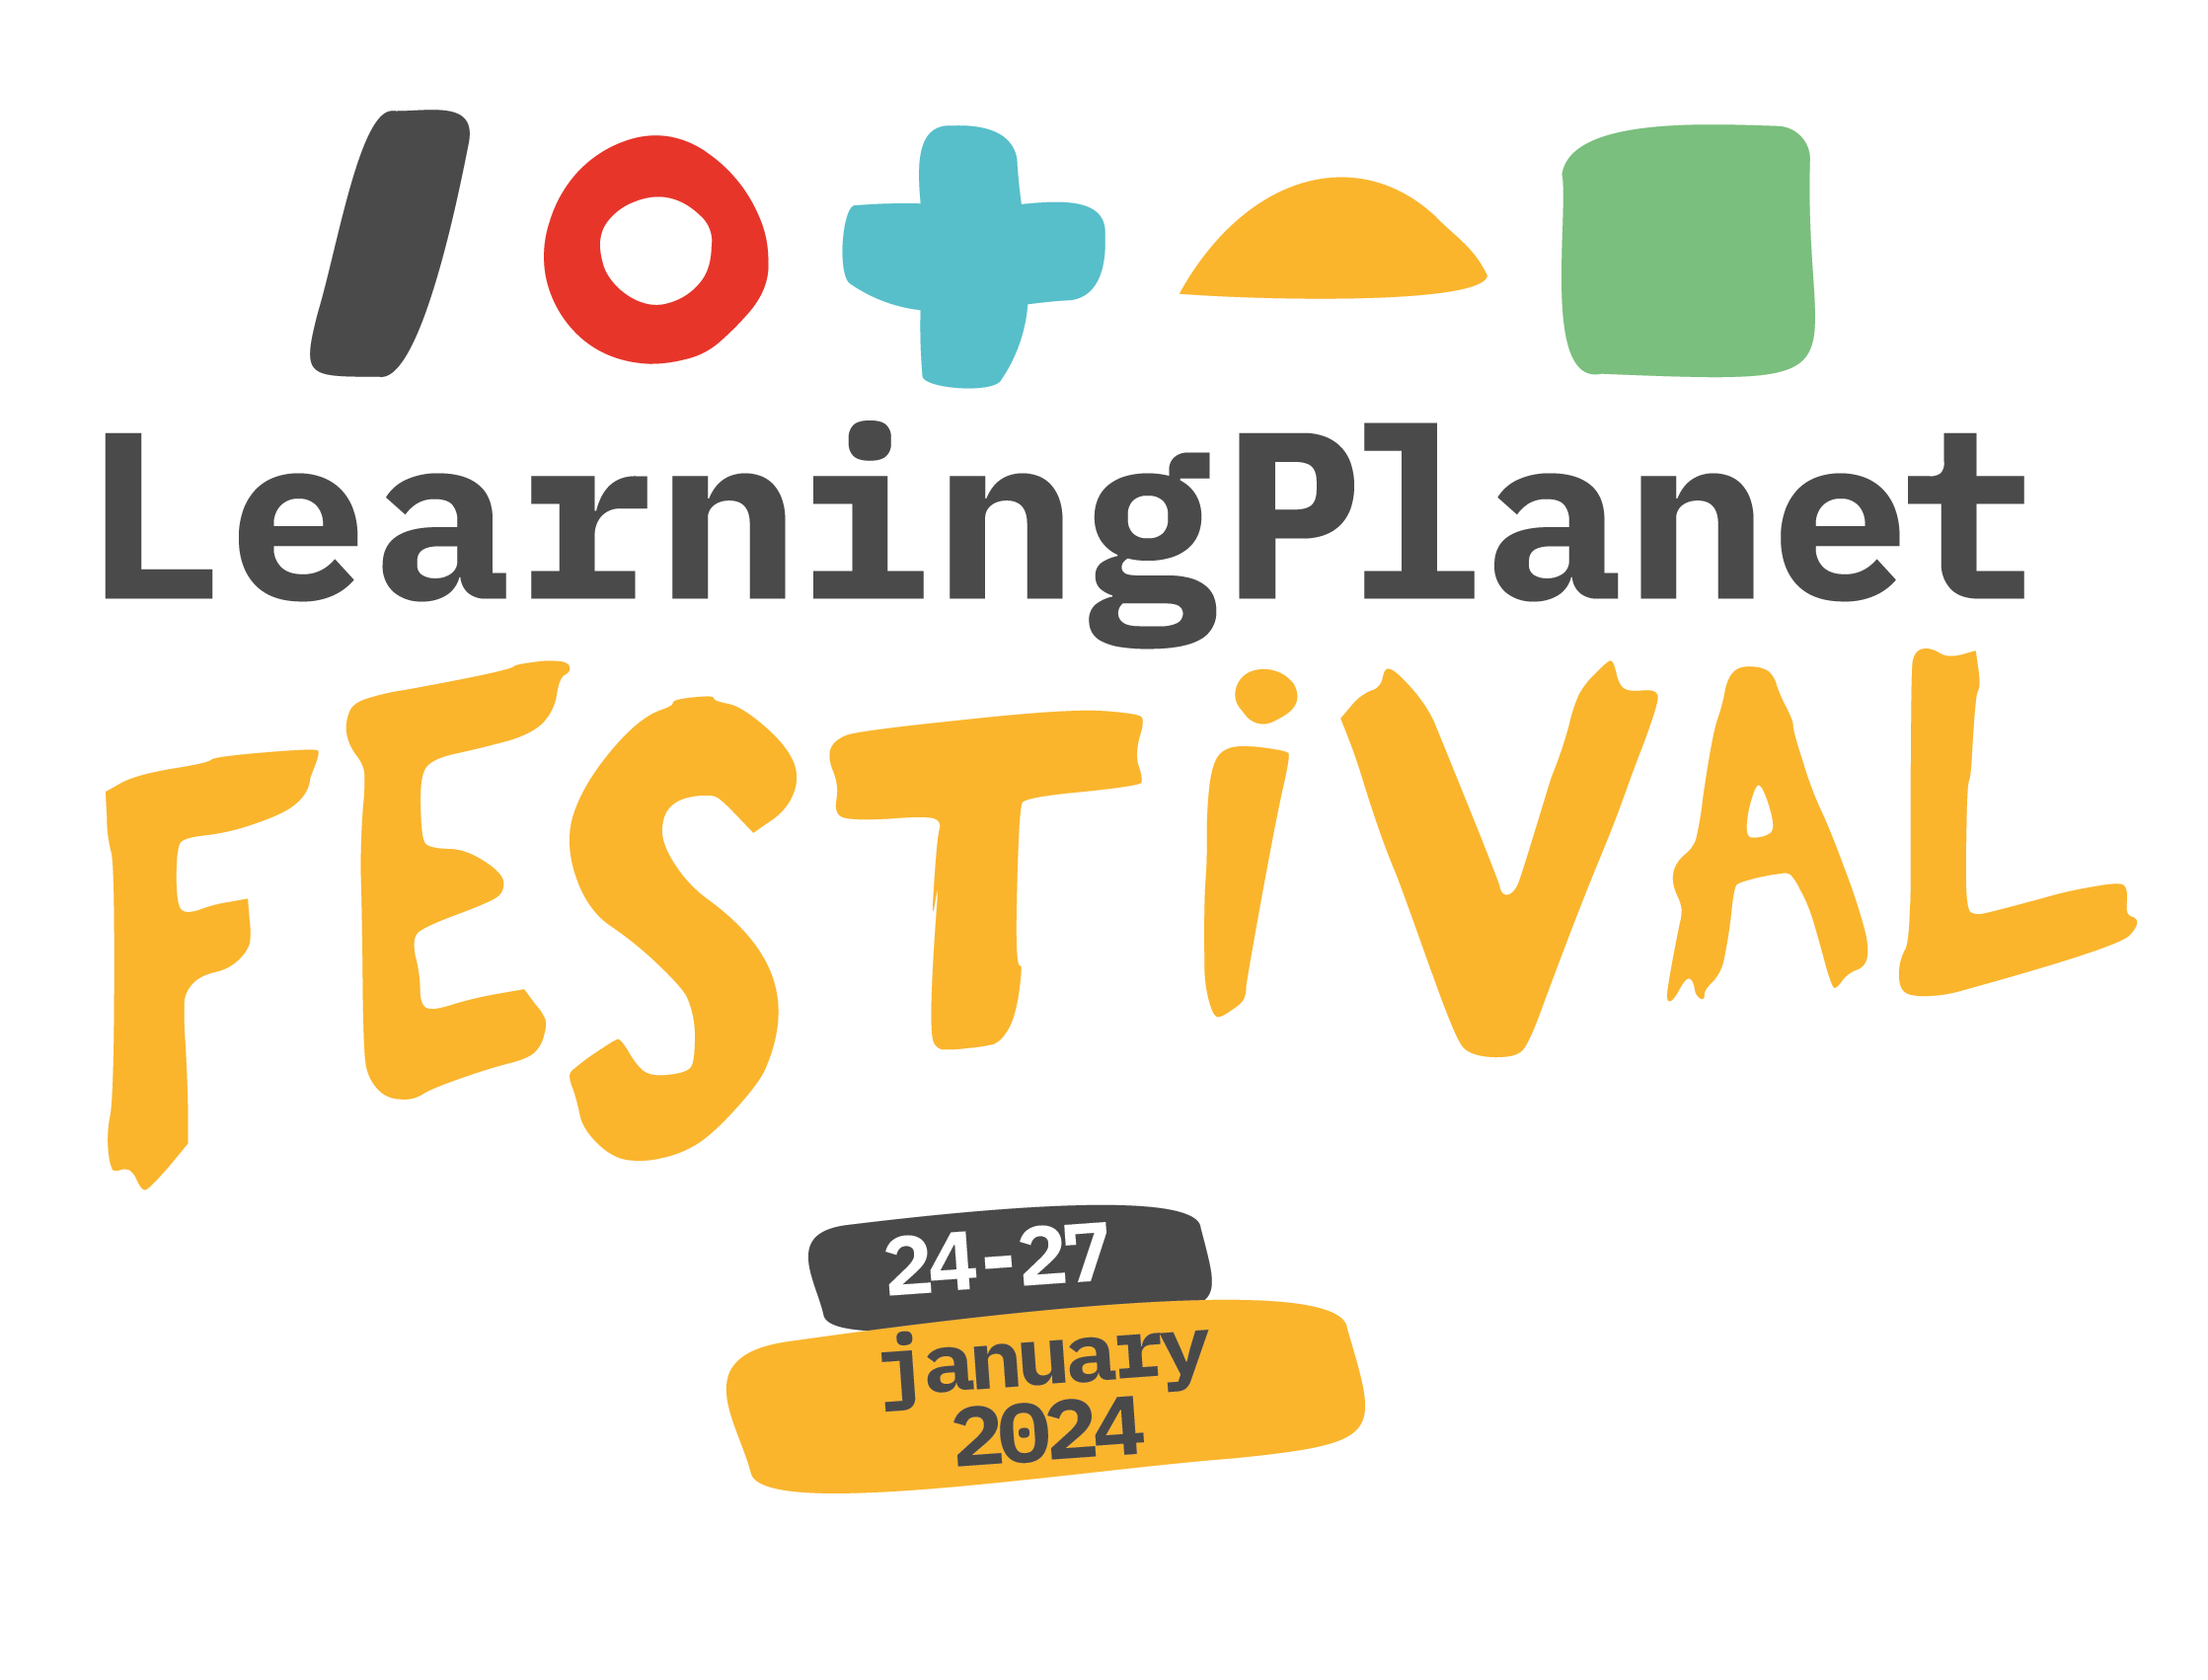 LearningPlanetFestival 2024